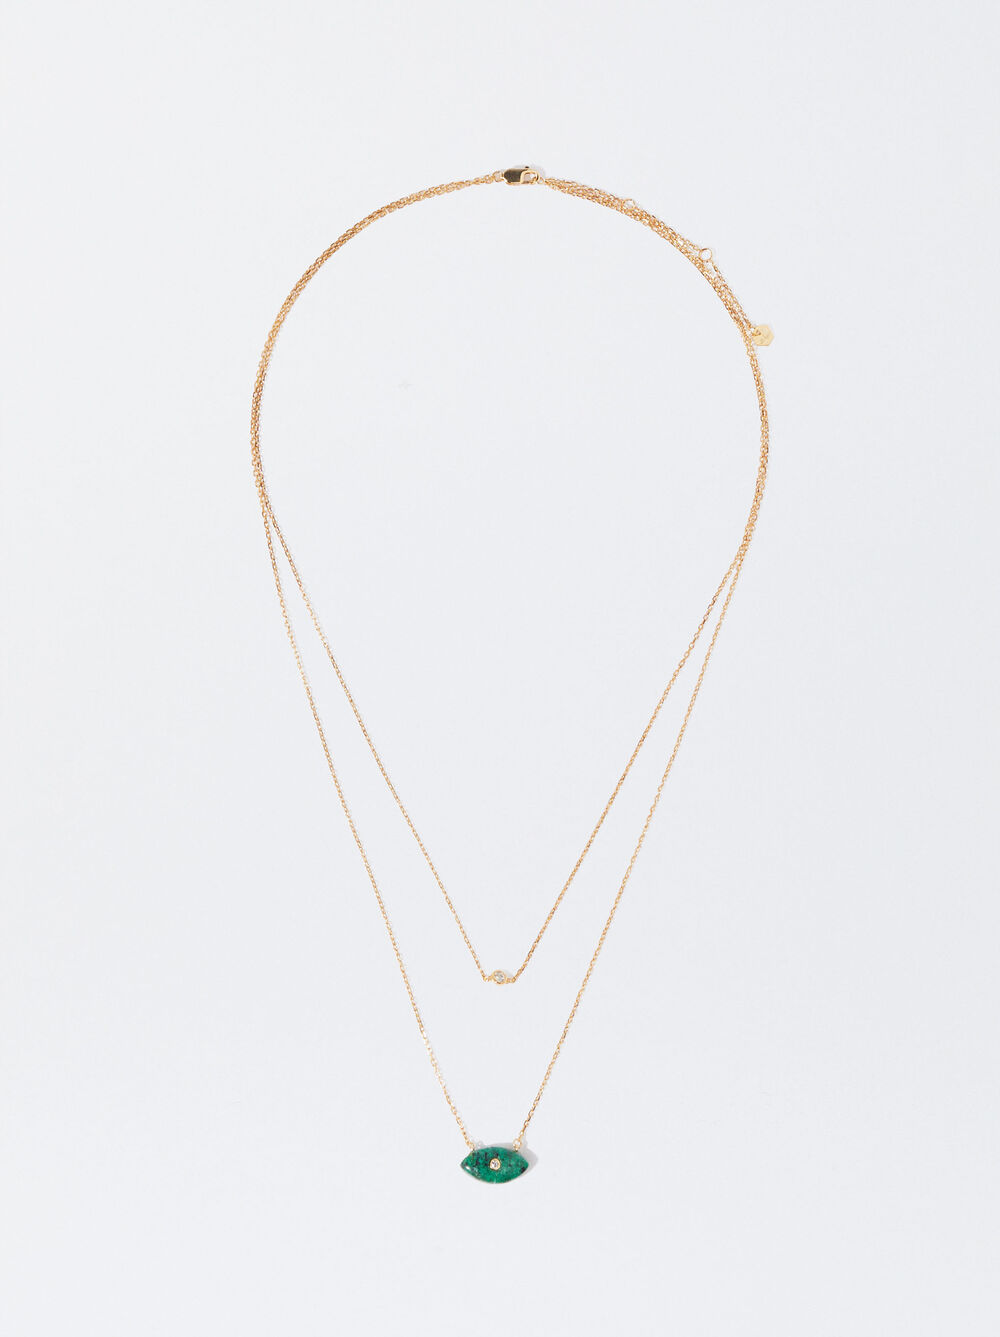 925 Silver Necklace With Stone - Green Jade